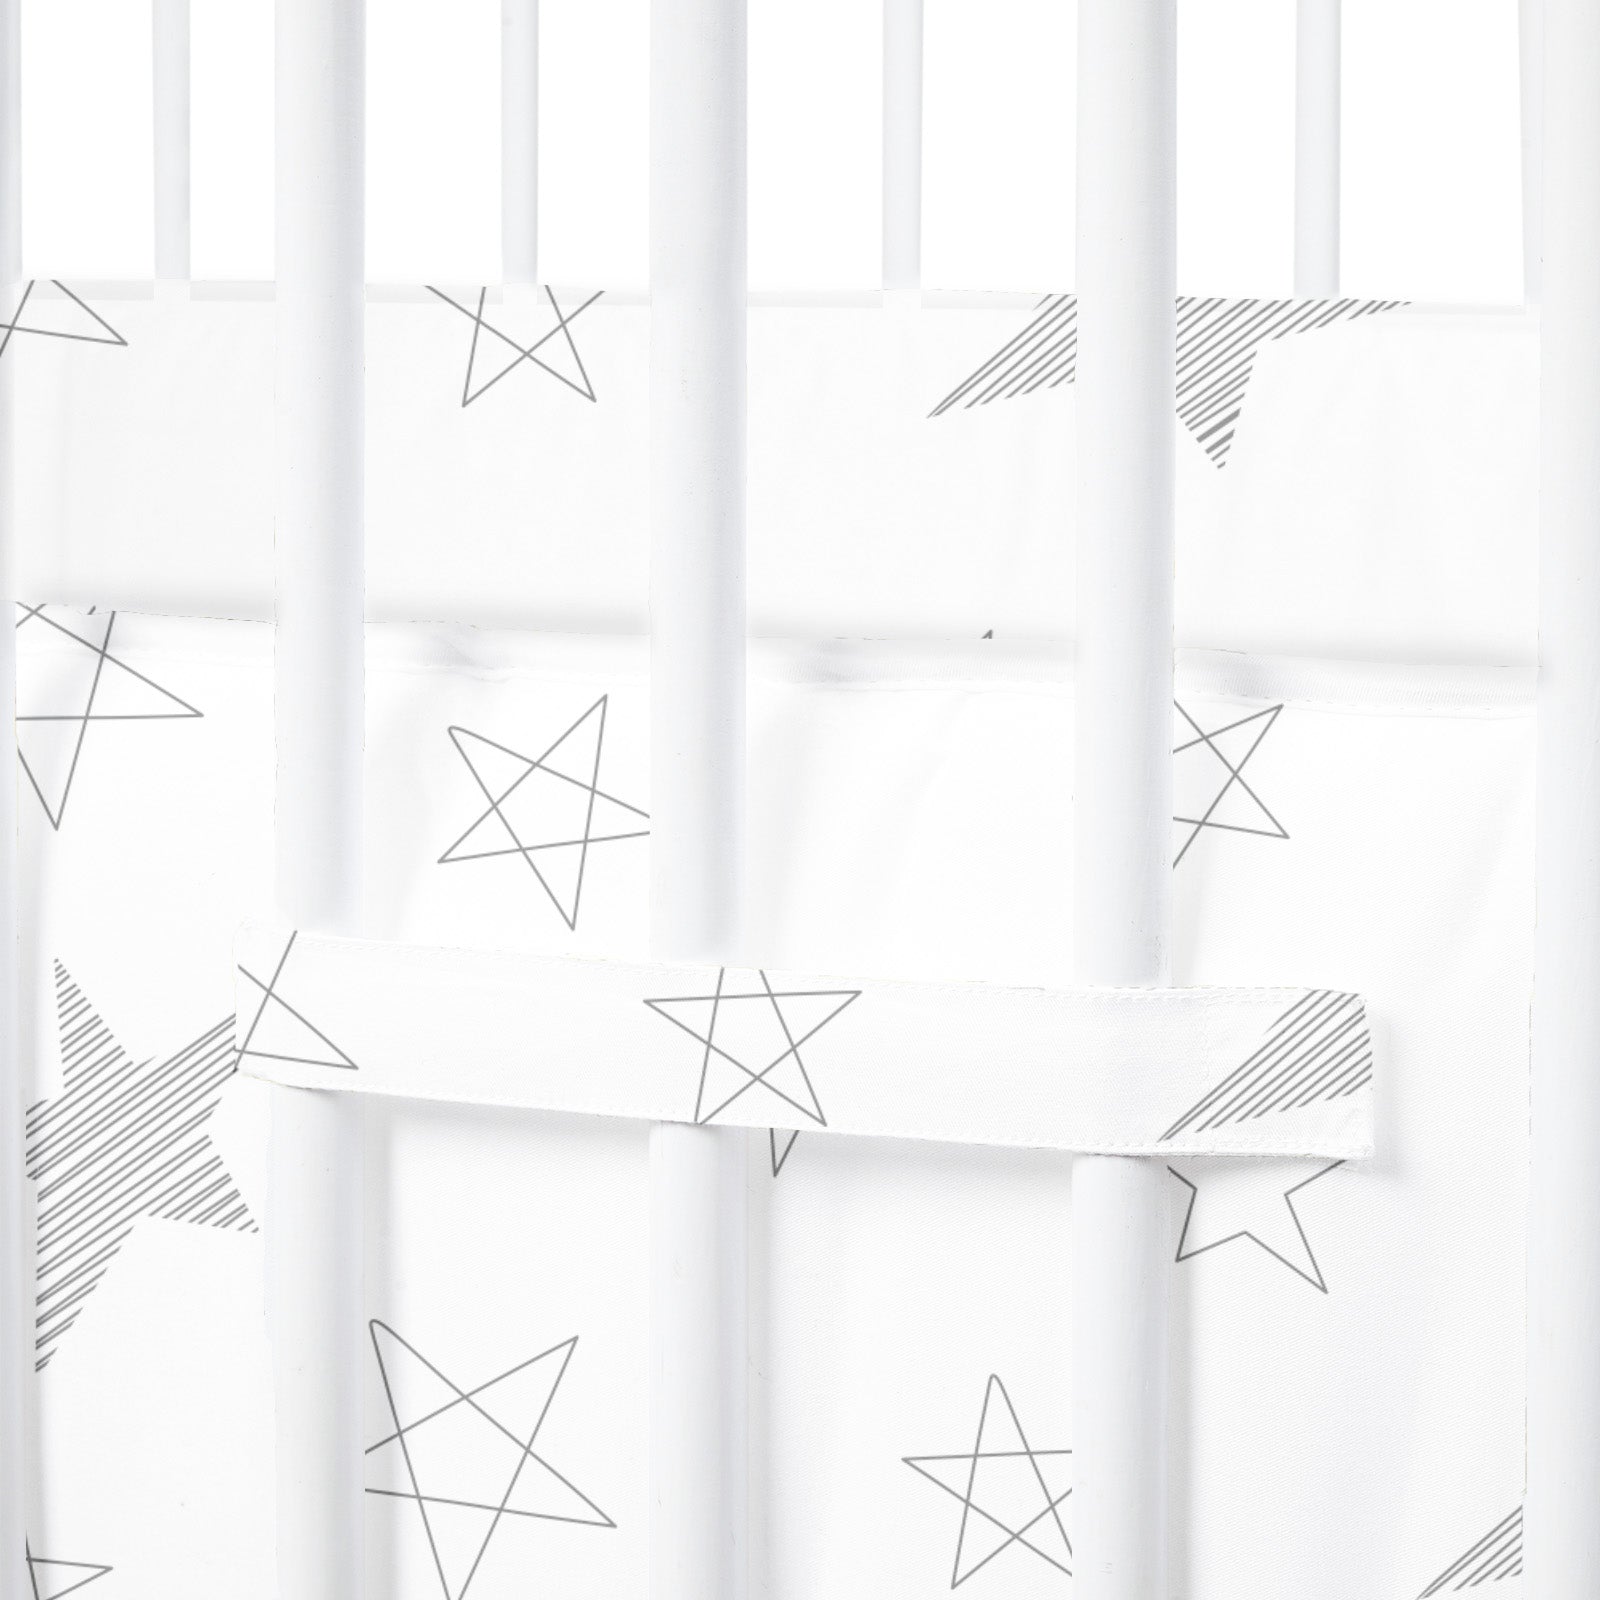 The White Cradle Baby Safe Cot Bumper Pad, Fits all Standard Cribs, Thick Padded Protective Liner for Child Nursery Bed, Soft Organic Cotton Fabric, Breathable, Non-Allergenic - Big Stars